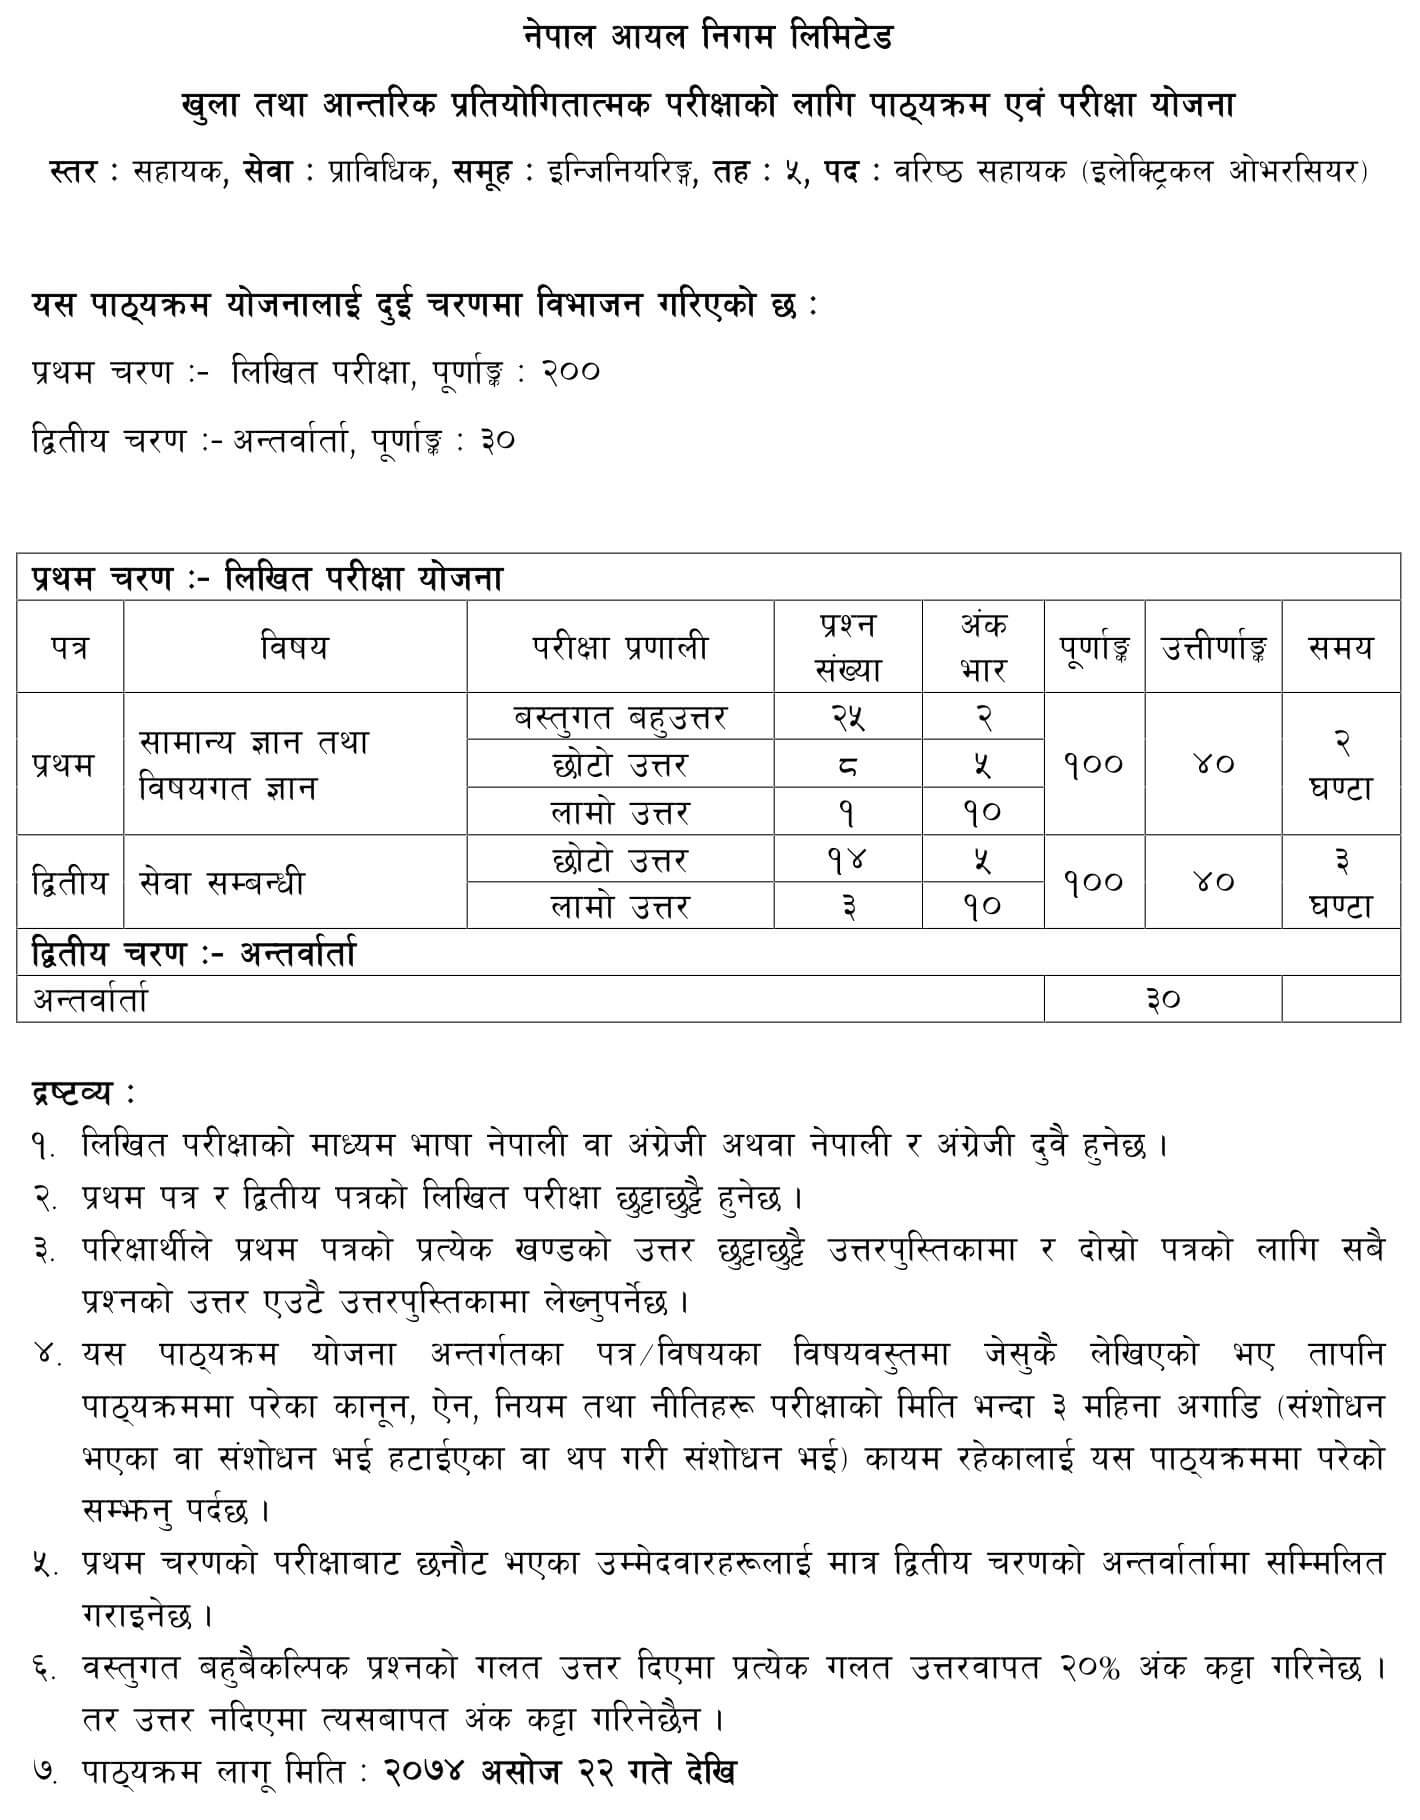 Nepal Oil Corporation - NOC Syllabus Department: Engineering Rank: Level 5 Senior Assistant (Electrical Oversear) Date: 2074/06/22. NOC Syllabus Senior Assistant Electrical Oversear PDF Download